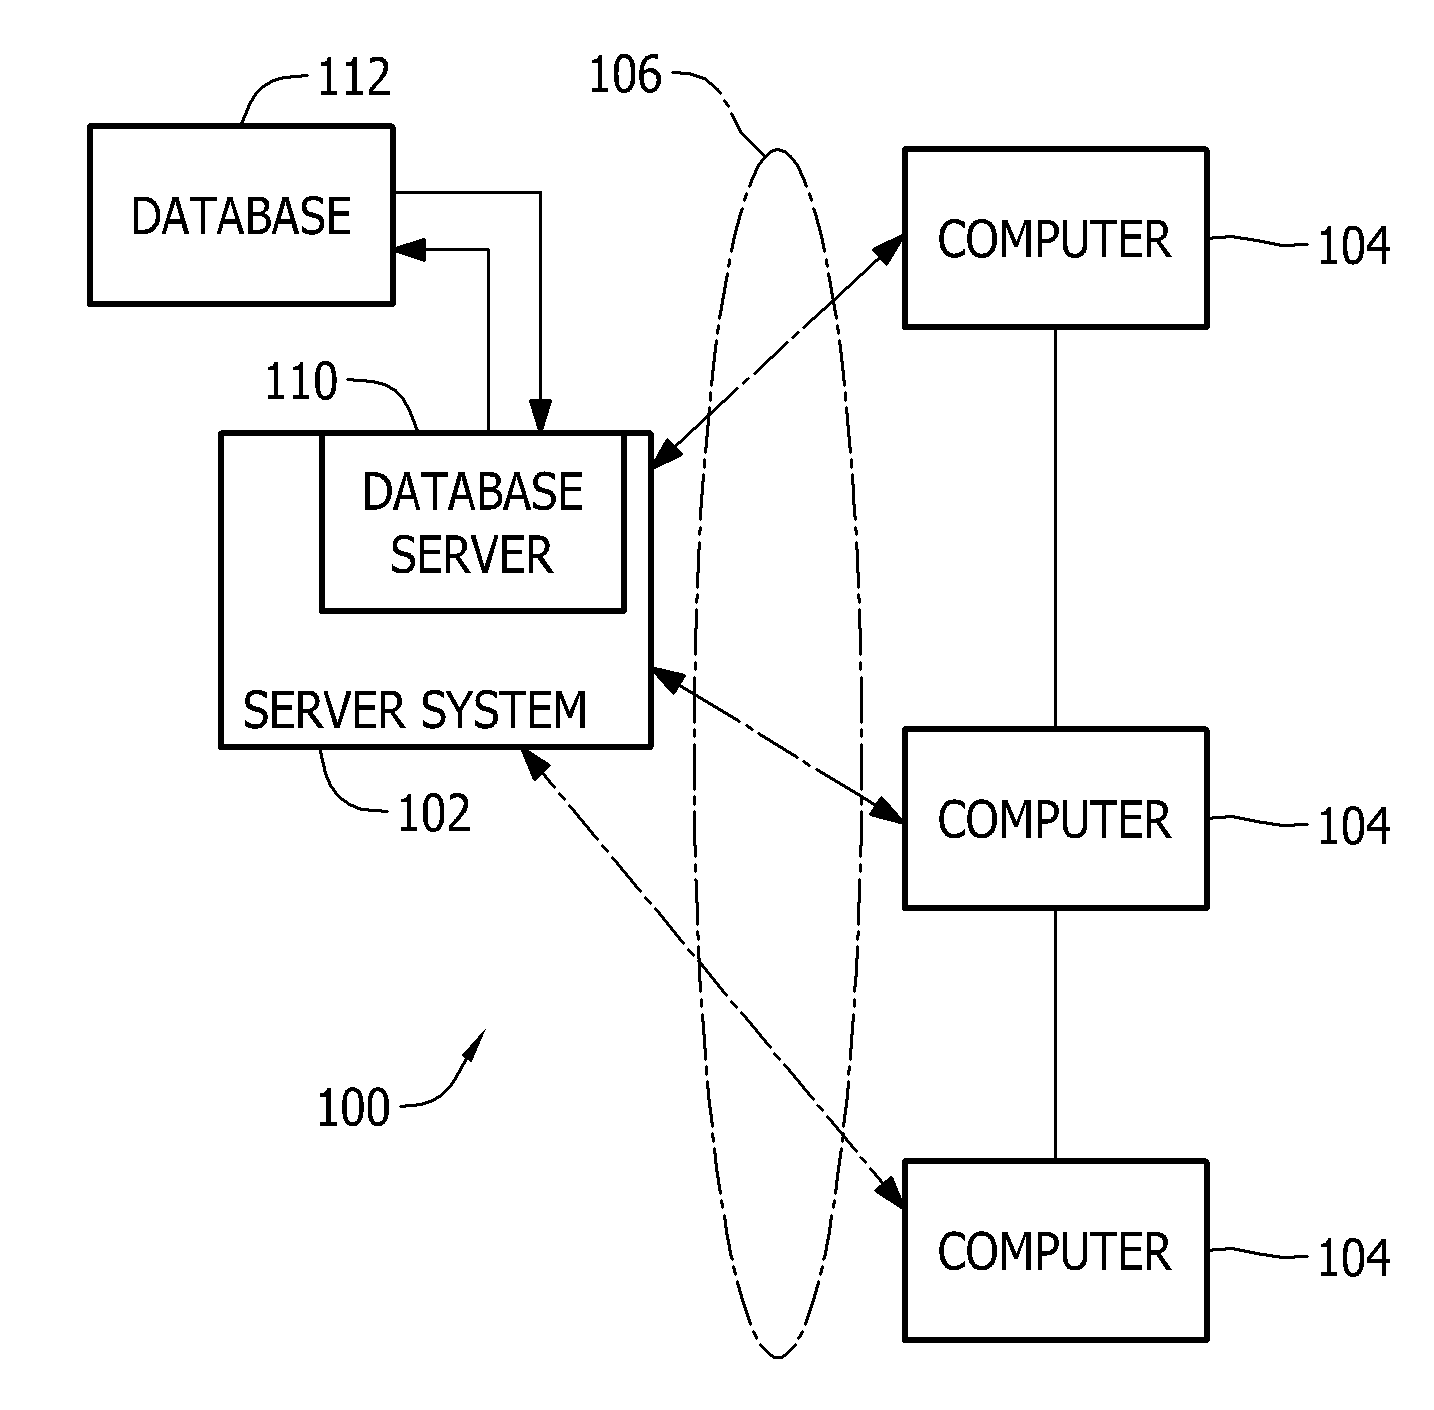 System and method for use in monitoring machines